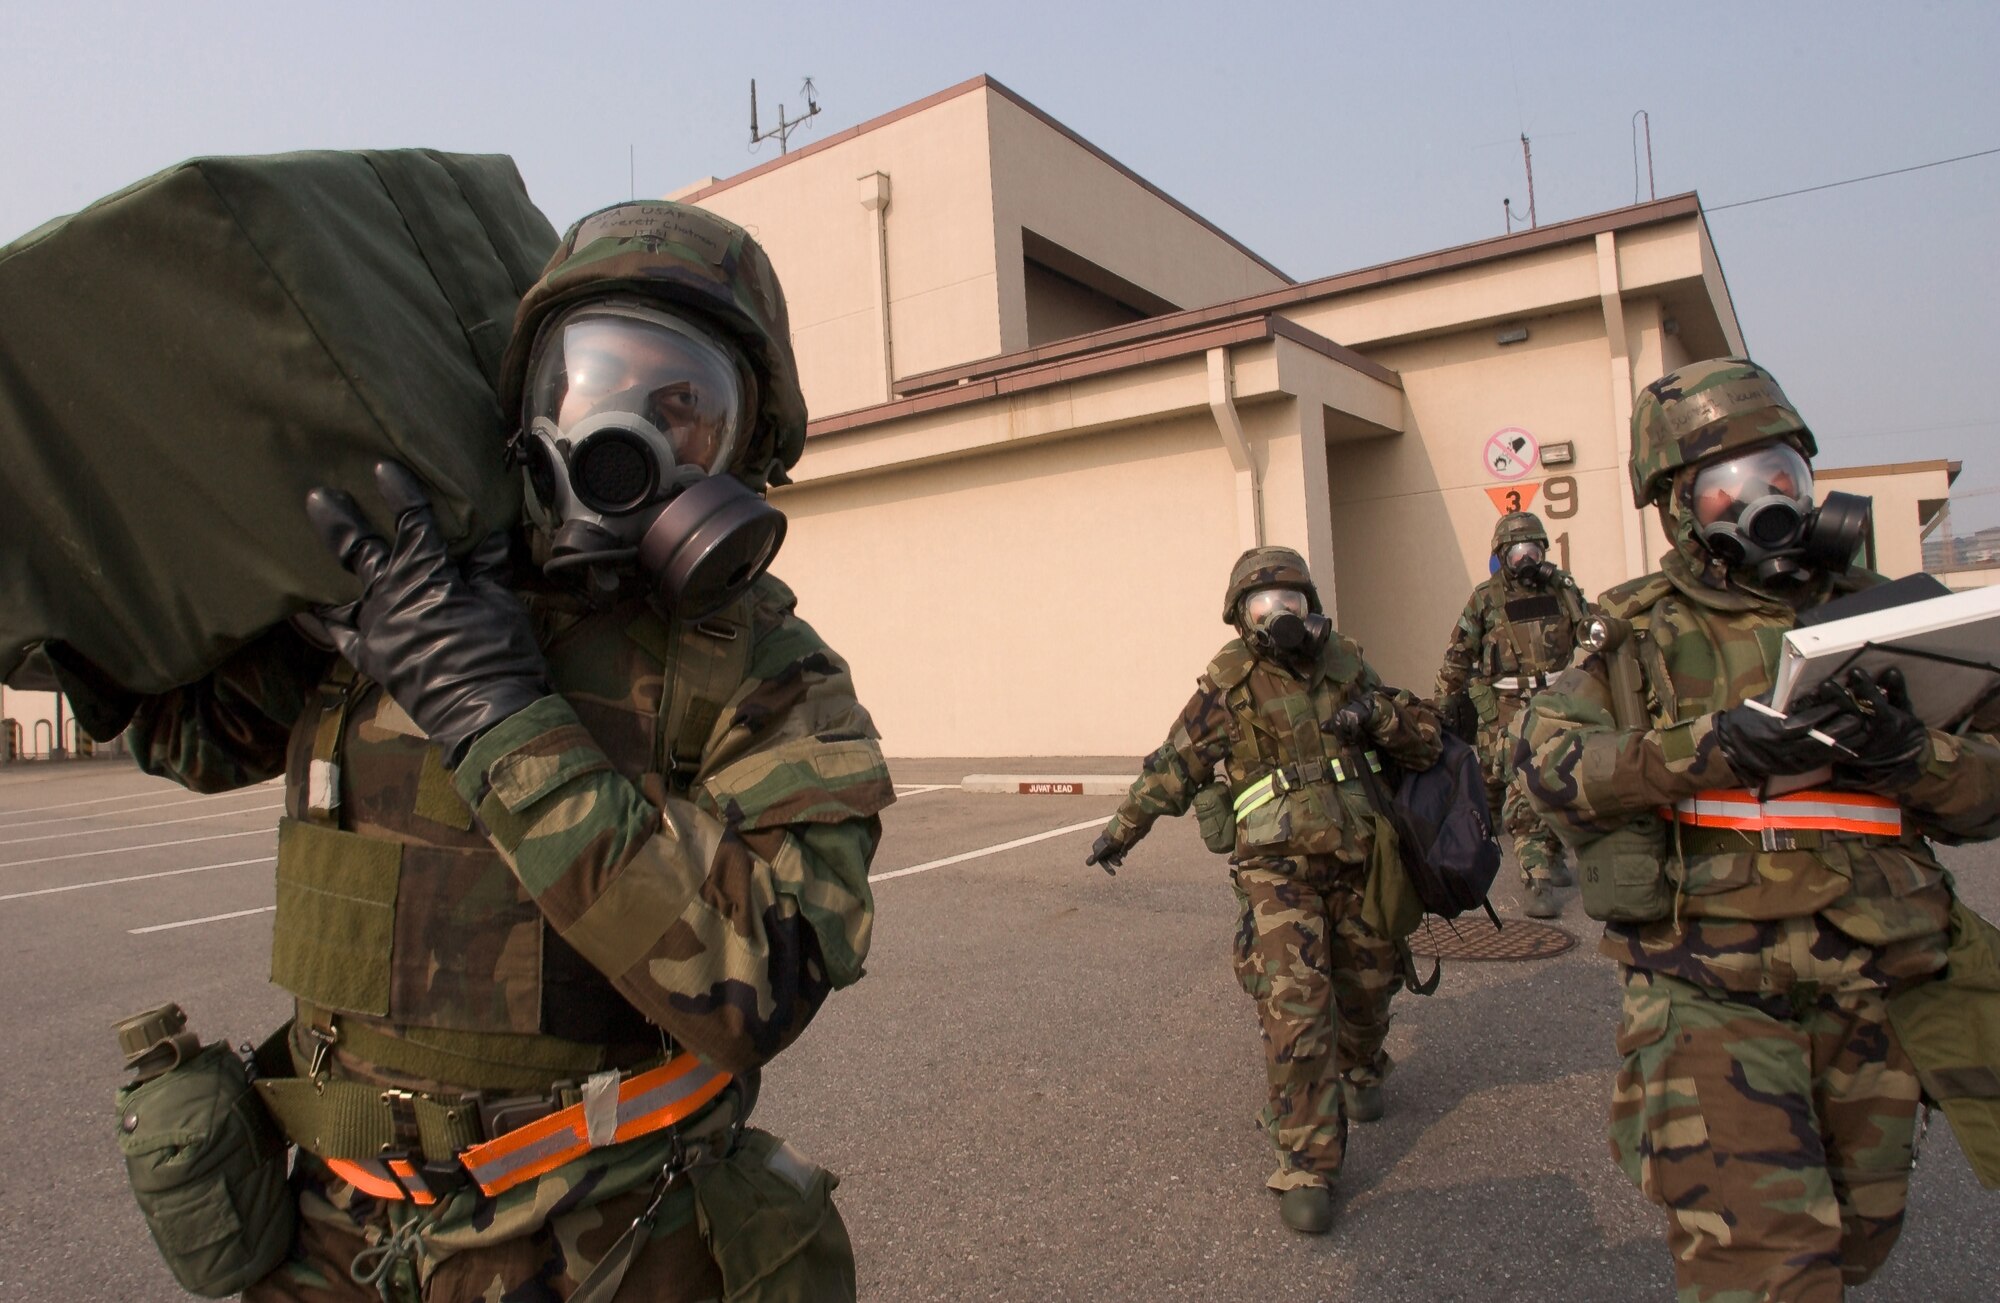 Members of the 80th Fighter Squadron, Kunsan AB, Republic of Korea, evacuate to an alternate location after their workcenter is damaged during a simulated chemical attack on Wednesday, February 21, 2006.  (U.S. Air Force Photo/Senior Airman Barry Loo)